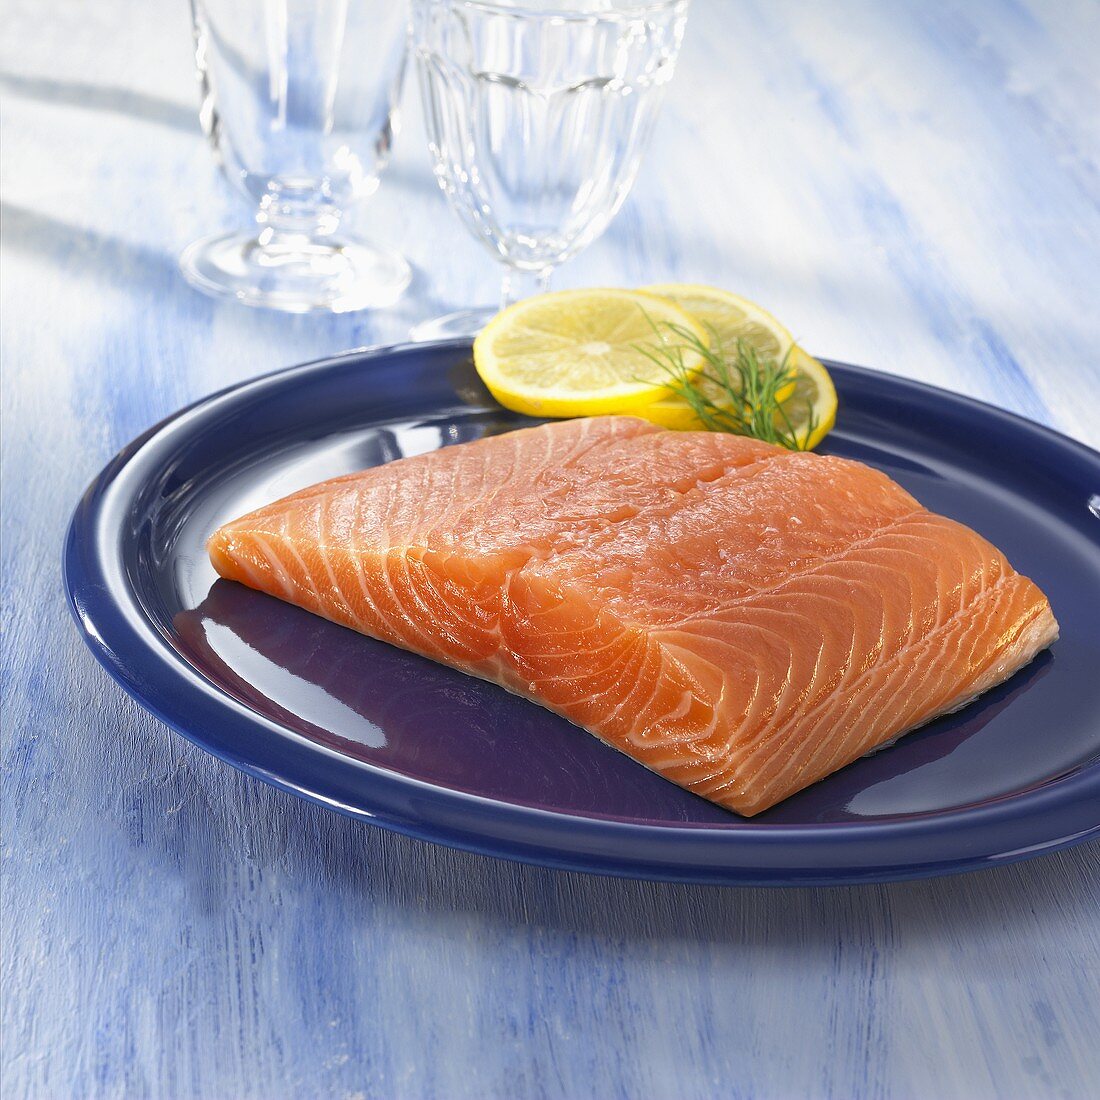 A salmon fillet with slices of lemon on a plate